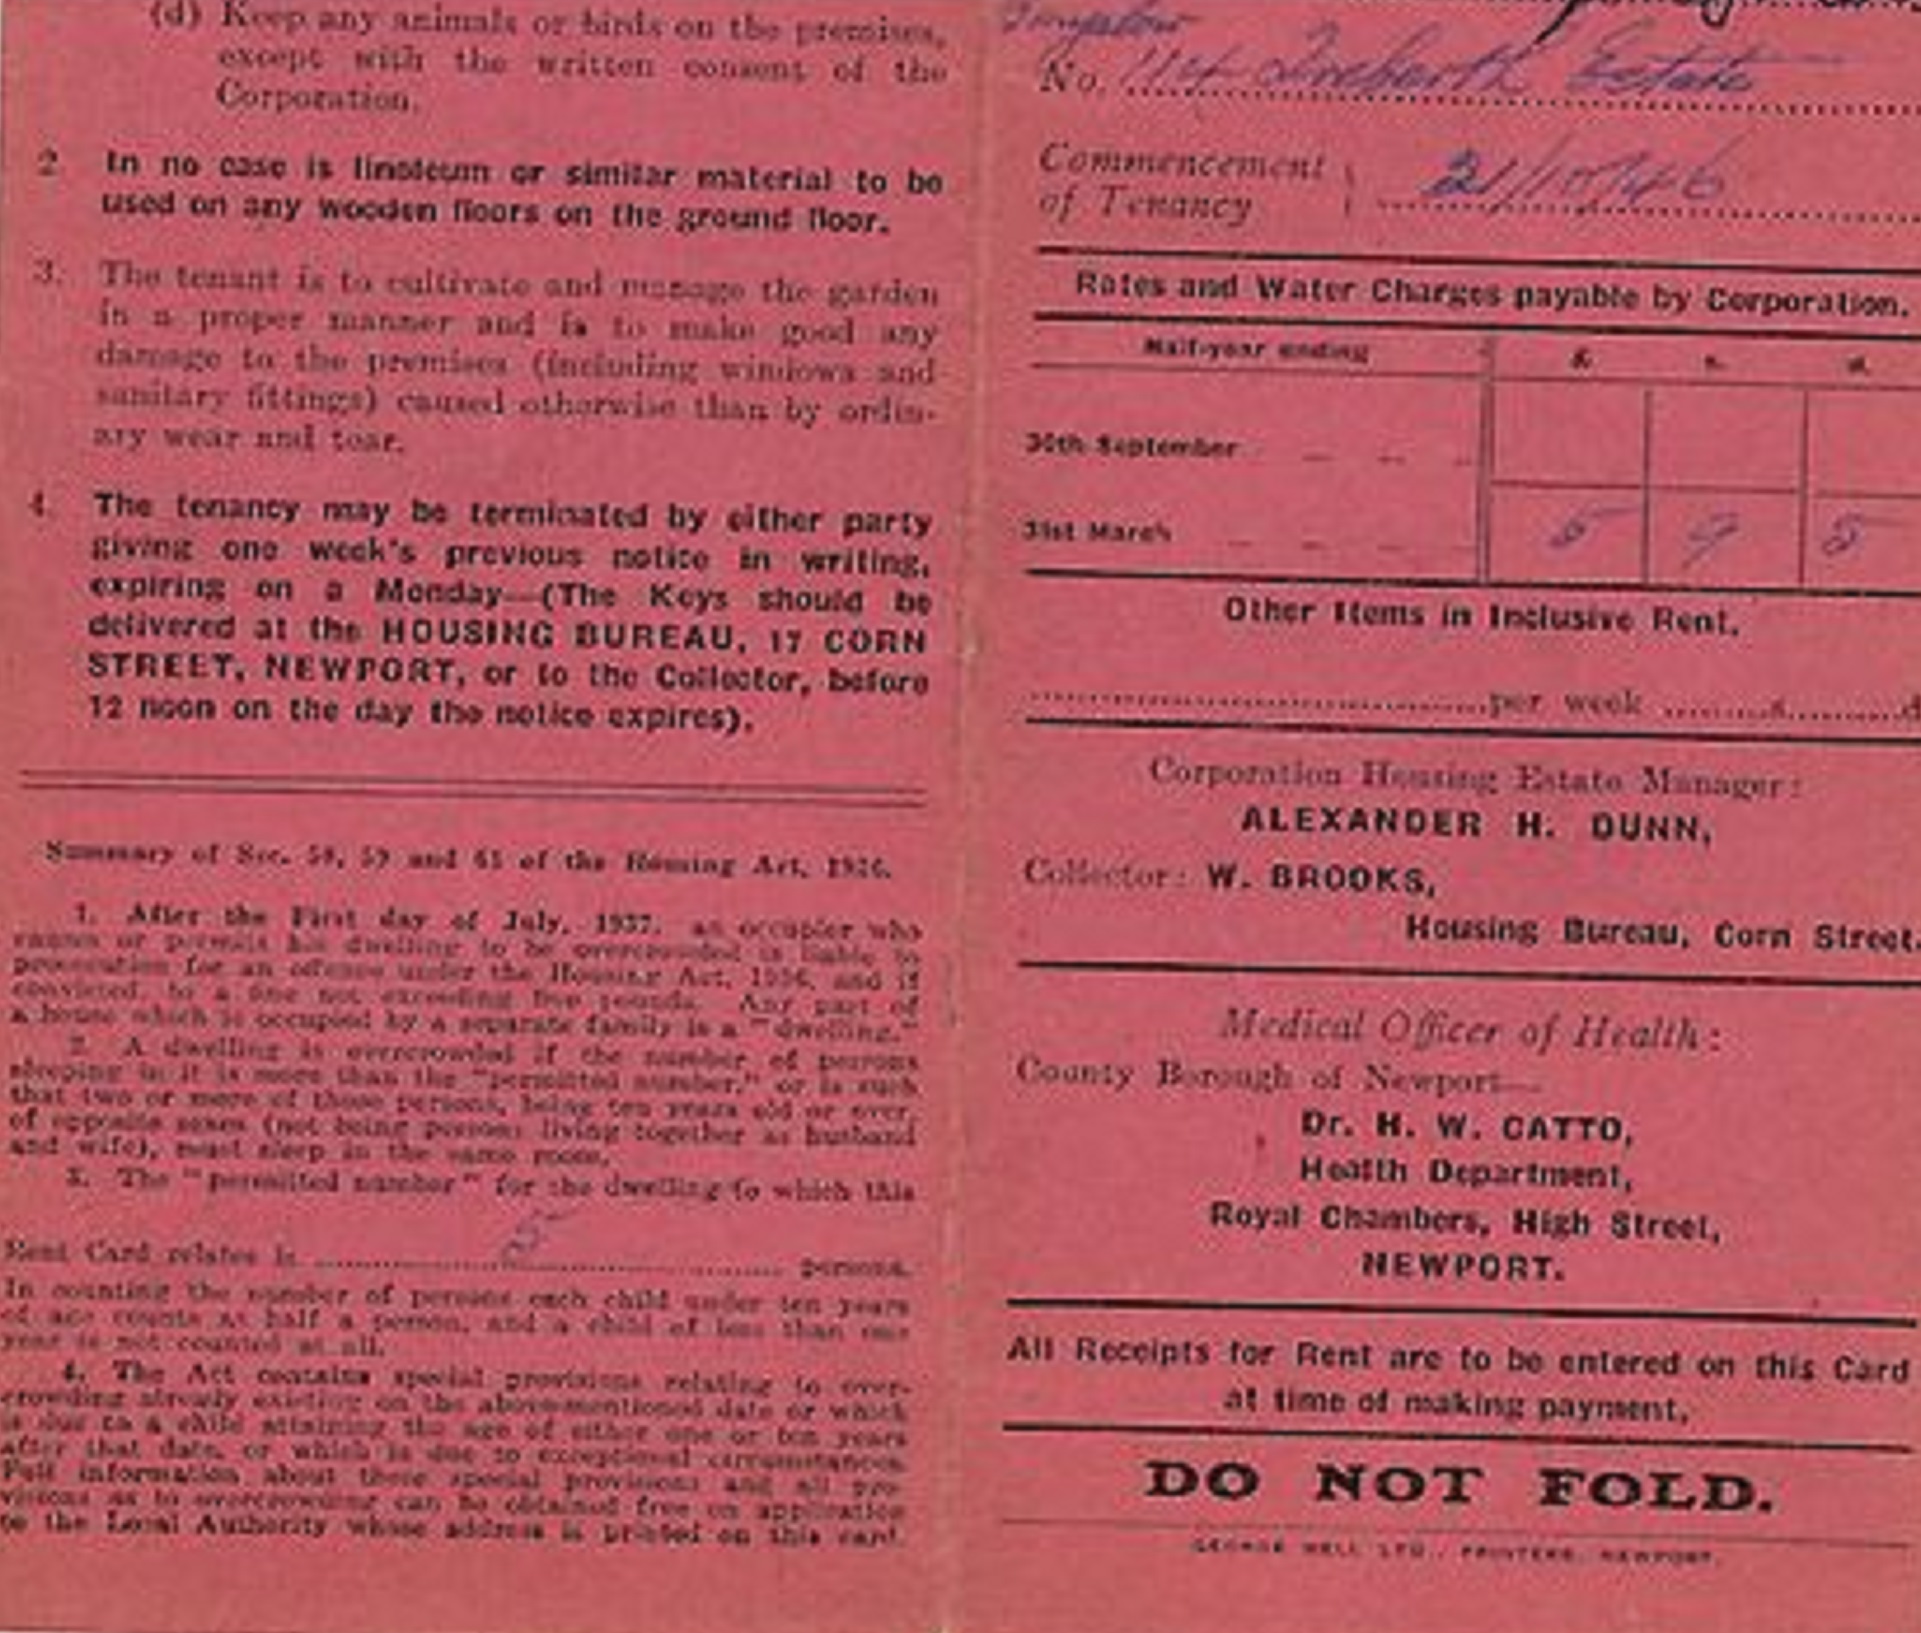 Alan Page's family Tenant's Card / Front - County Borough of Newport 1946-1947